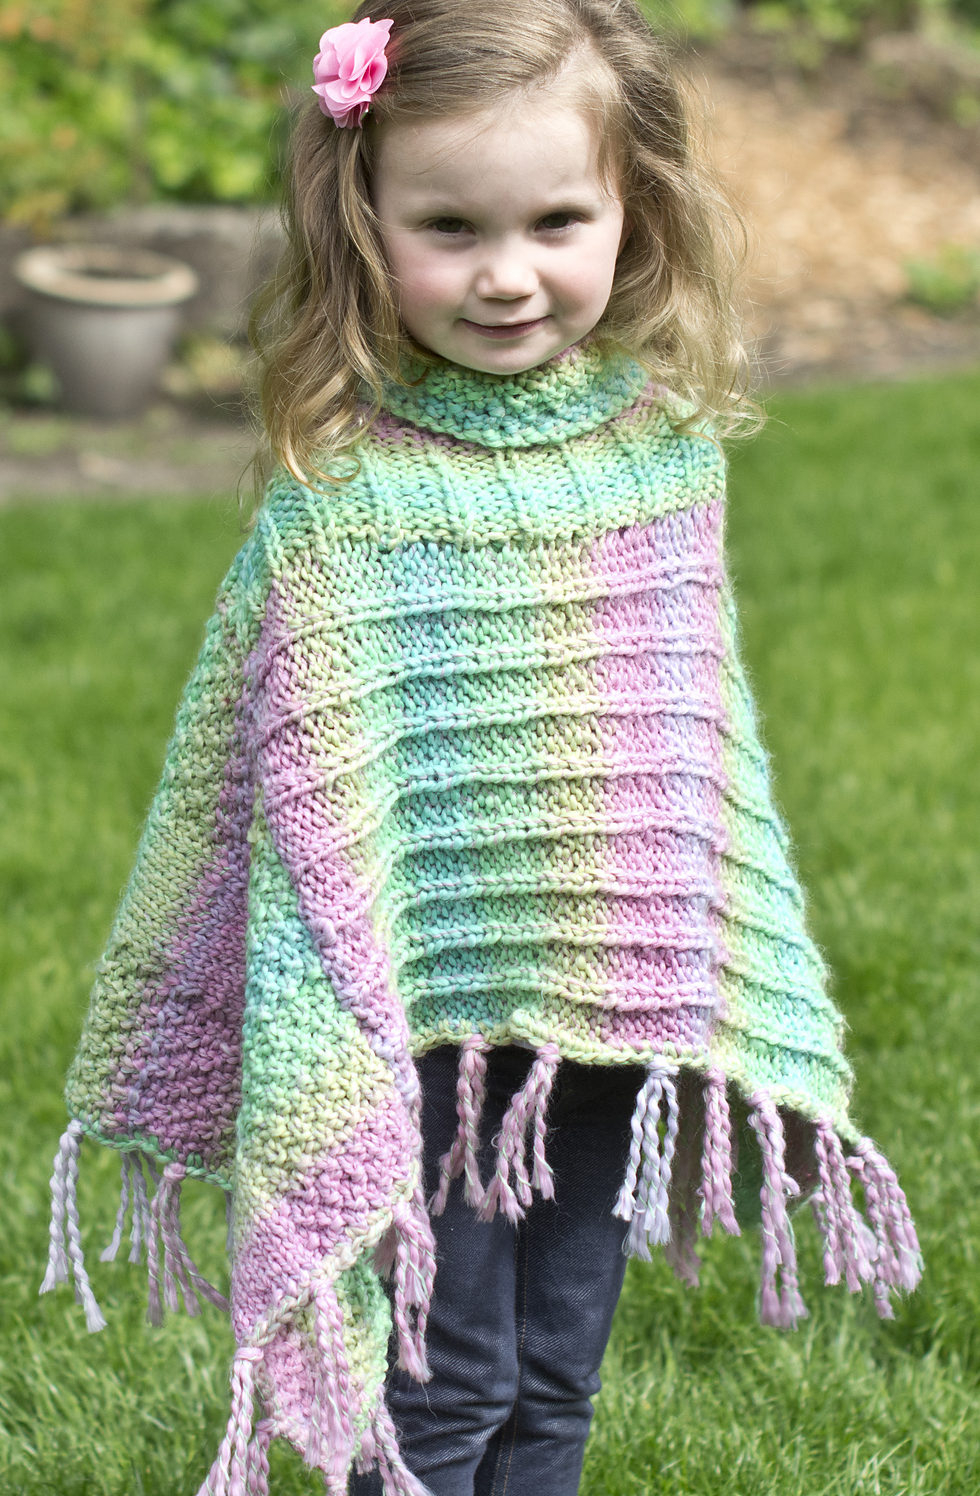 Free Knitting Patterns For Ponchos Or Capes Ponchos For Babies And Children In The Loop Knitting